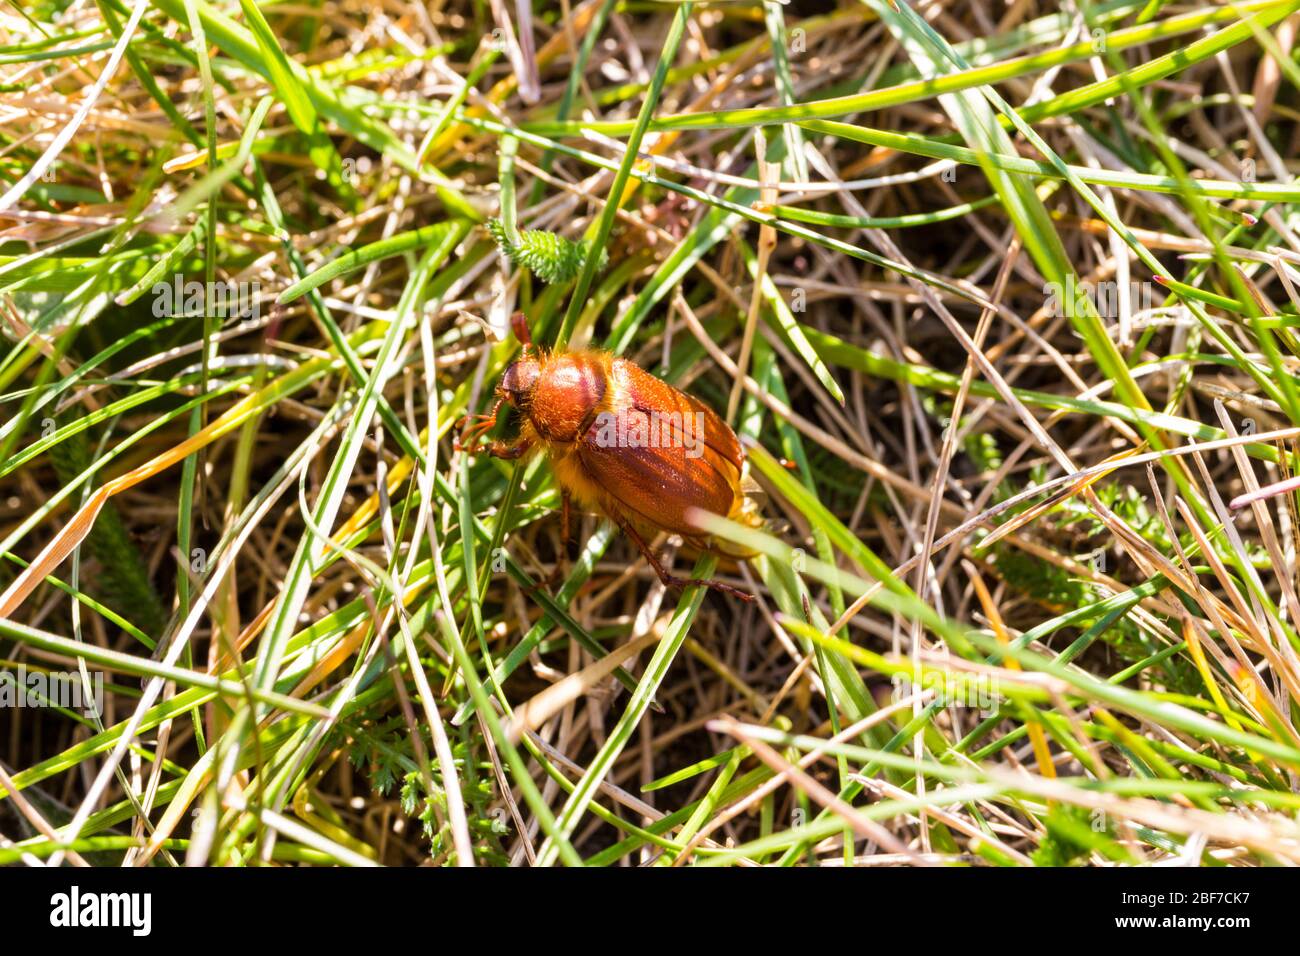 Cockchafer or maybug Holochelus aequinoctialis creeping in grass right after coming out of earth in early April, Sopron, Hungary Stock Photo